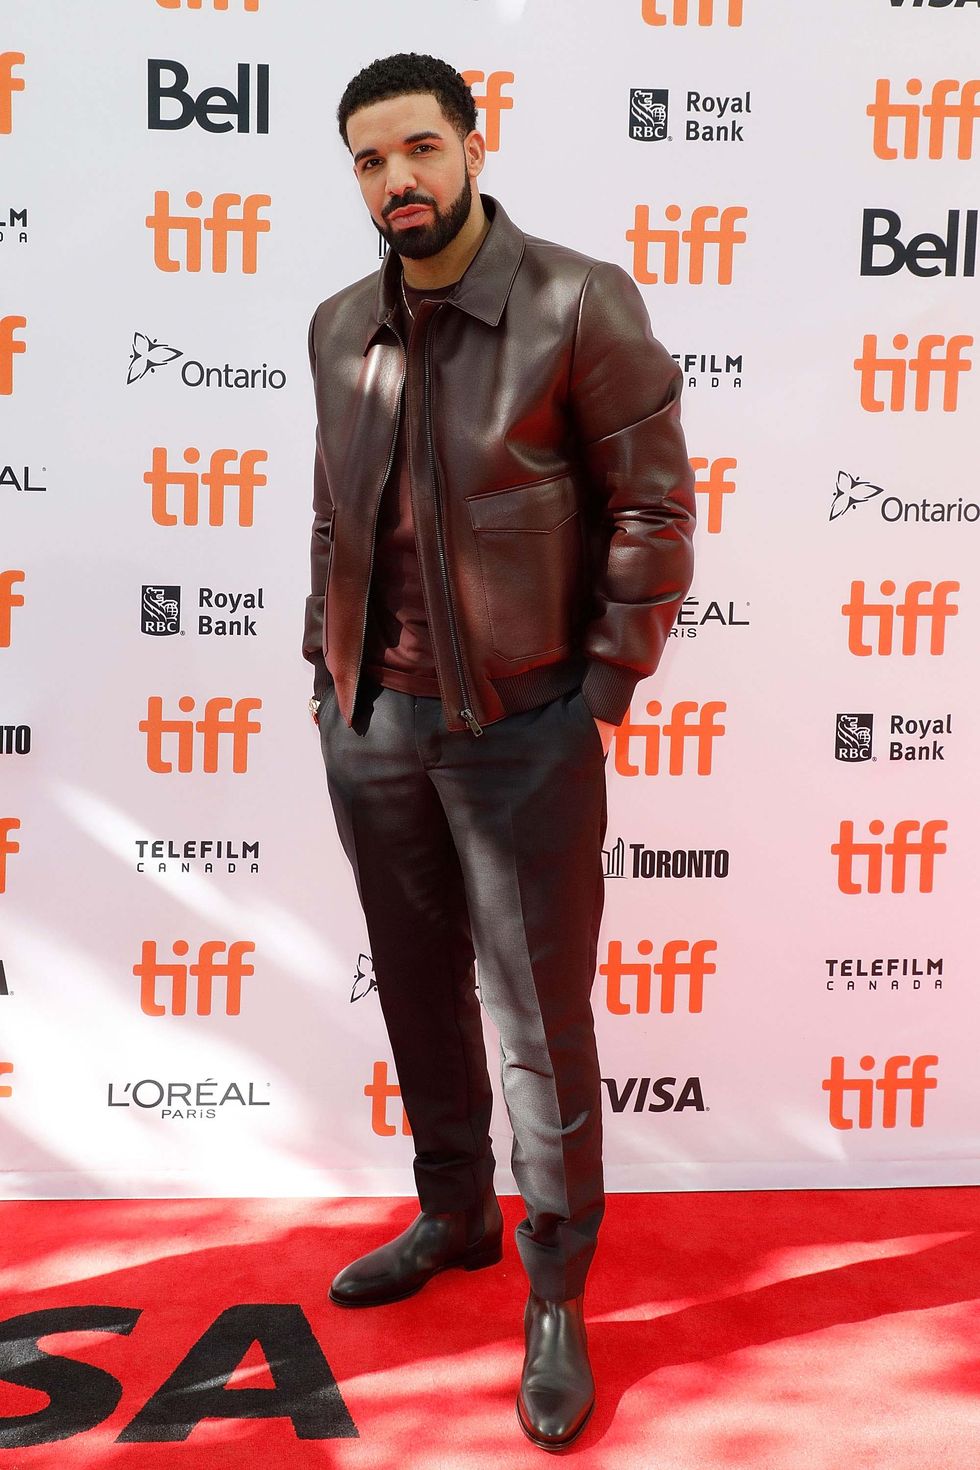 LeBron James Rocks 'Out Of This World' Leather Jacket On The Red Carpet